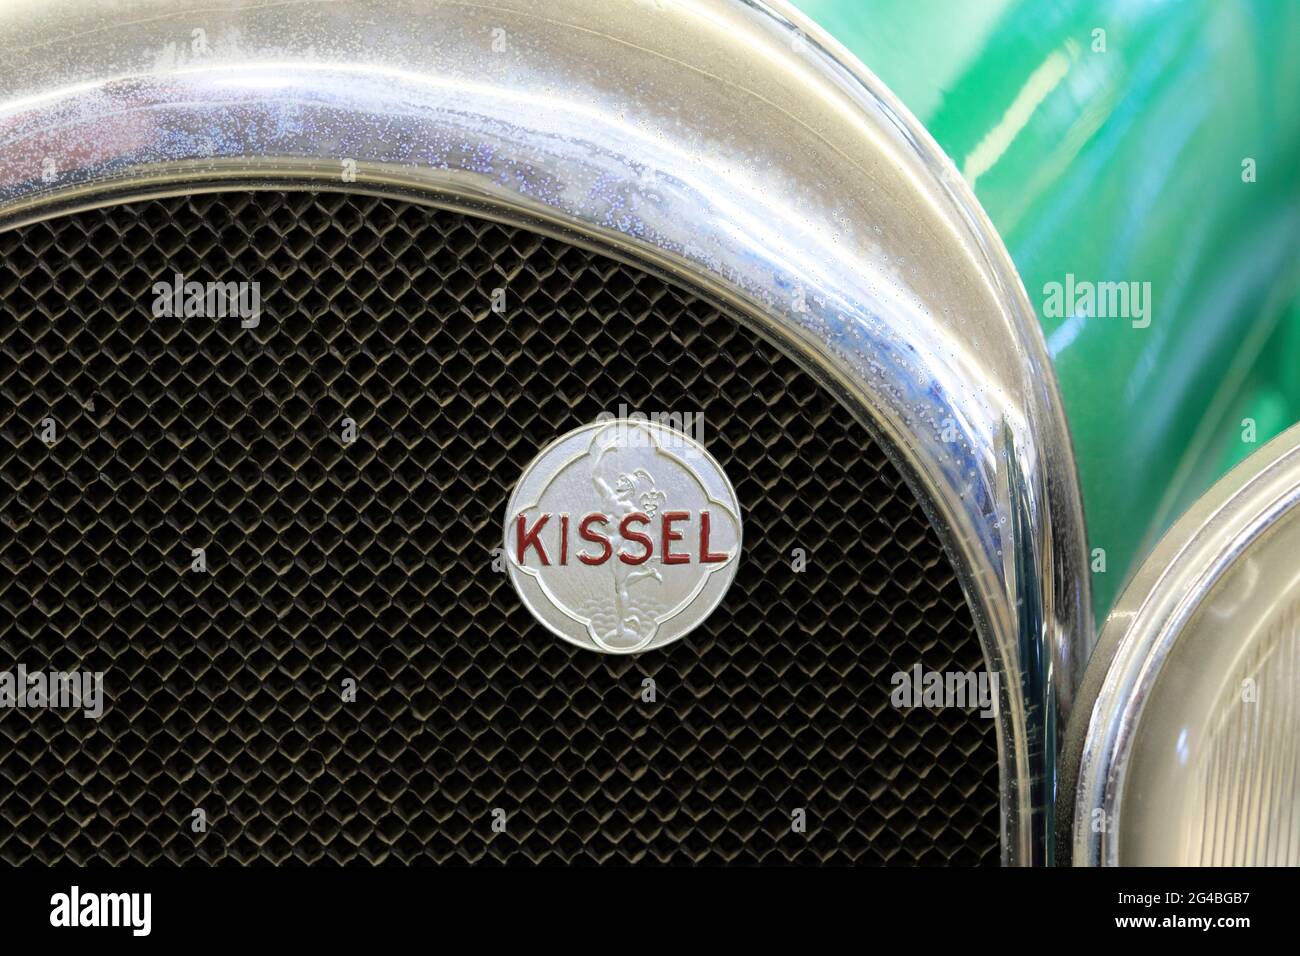 A Kissel Car front end grill and logo. Kissel Motor Car Company operated from 1906-1931. Space Farms Zoo and Museum, Beemerville, New Jersey, USA Stock Photo